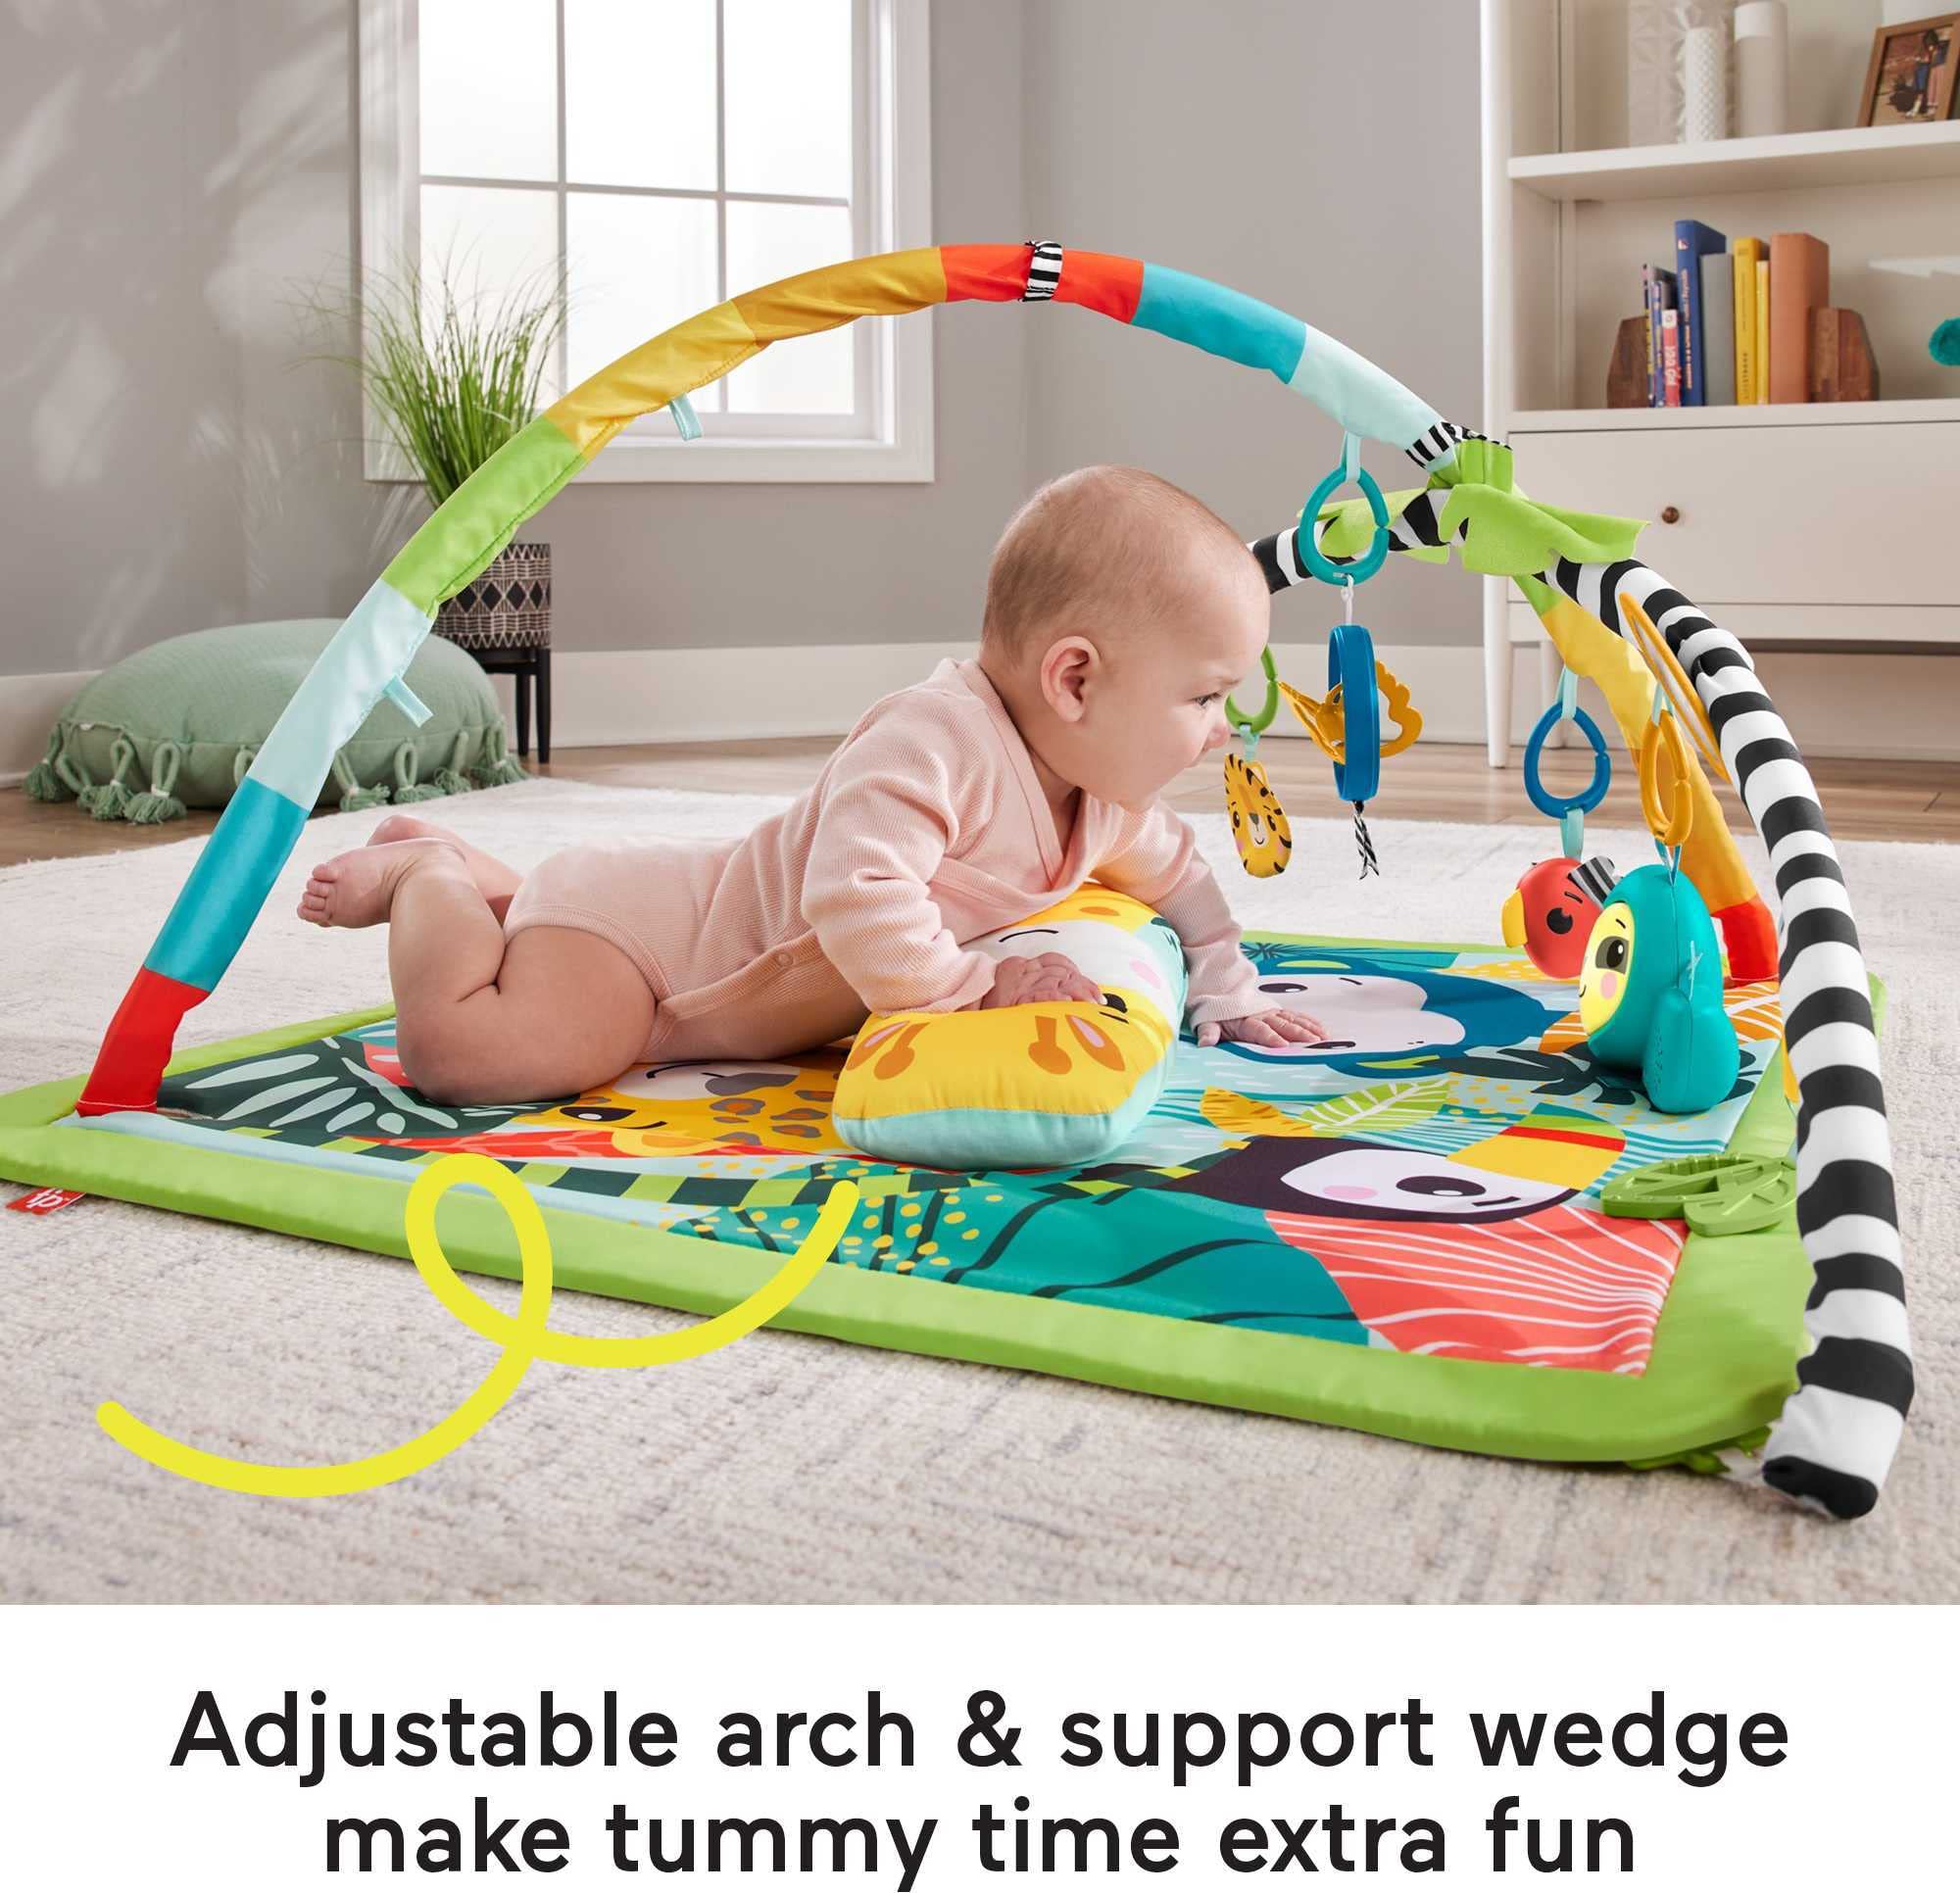 Fisher Price Newborn To Toddler Playmat 3-In-1 Rainforest Sensory Gym with Tummy Wedge, 5 Baby Toys and Music & Lights Sloth